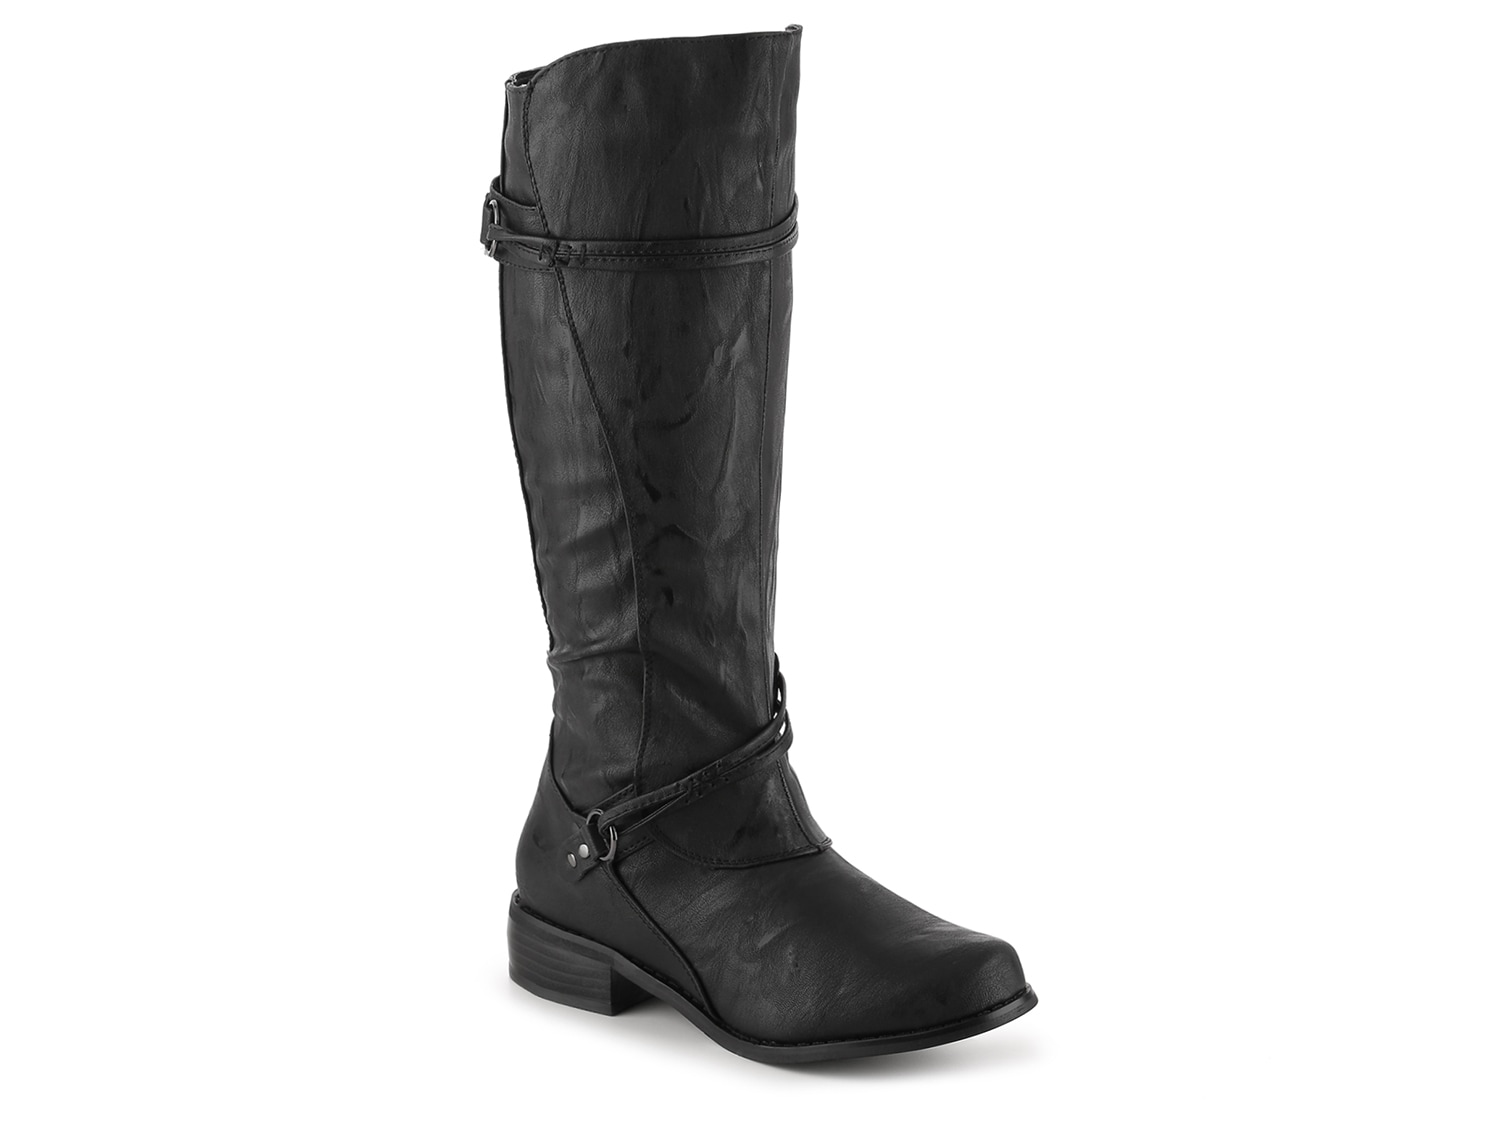 Journee Collection Harley Riding Boot - Free Shipping | DSW